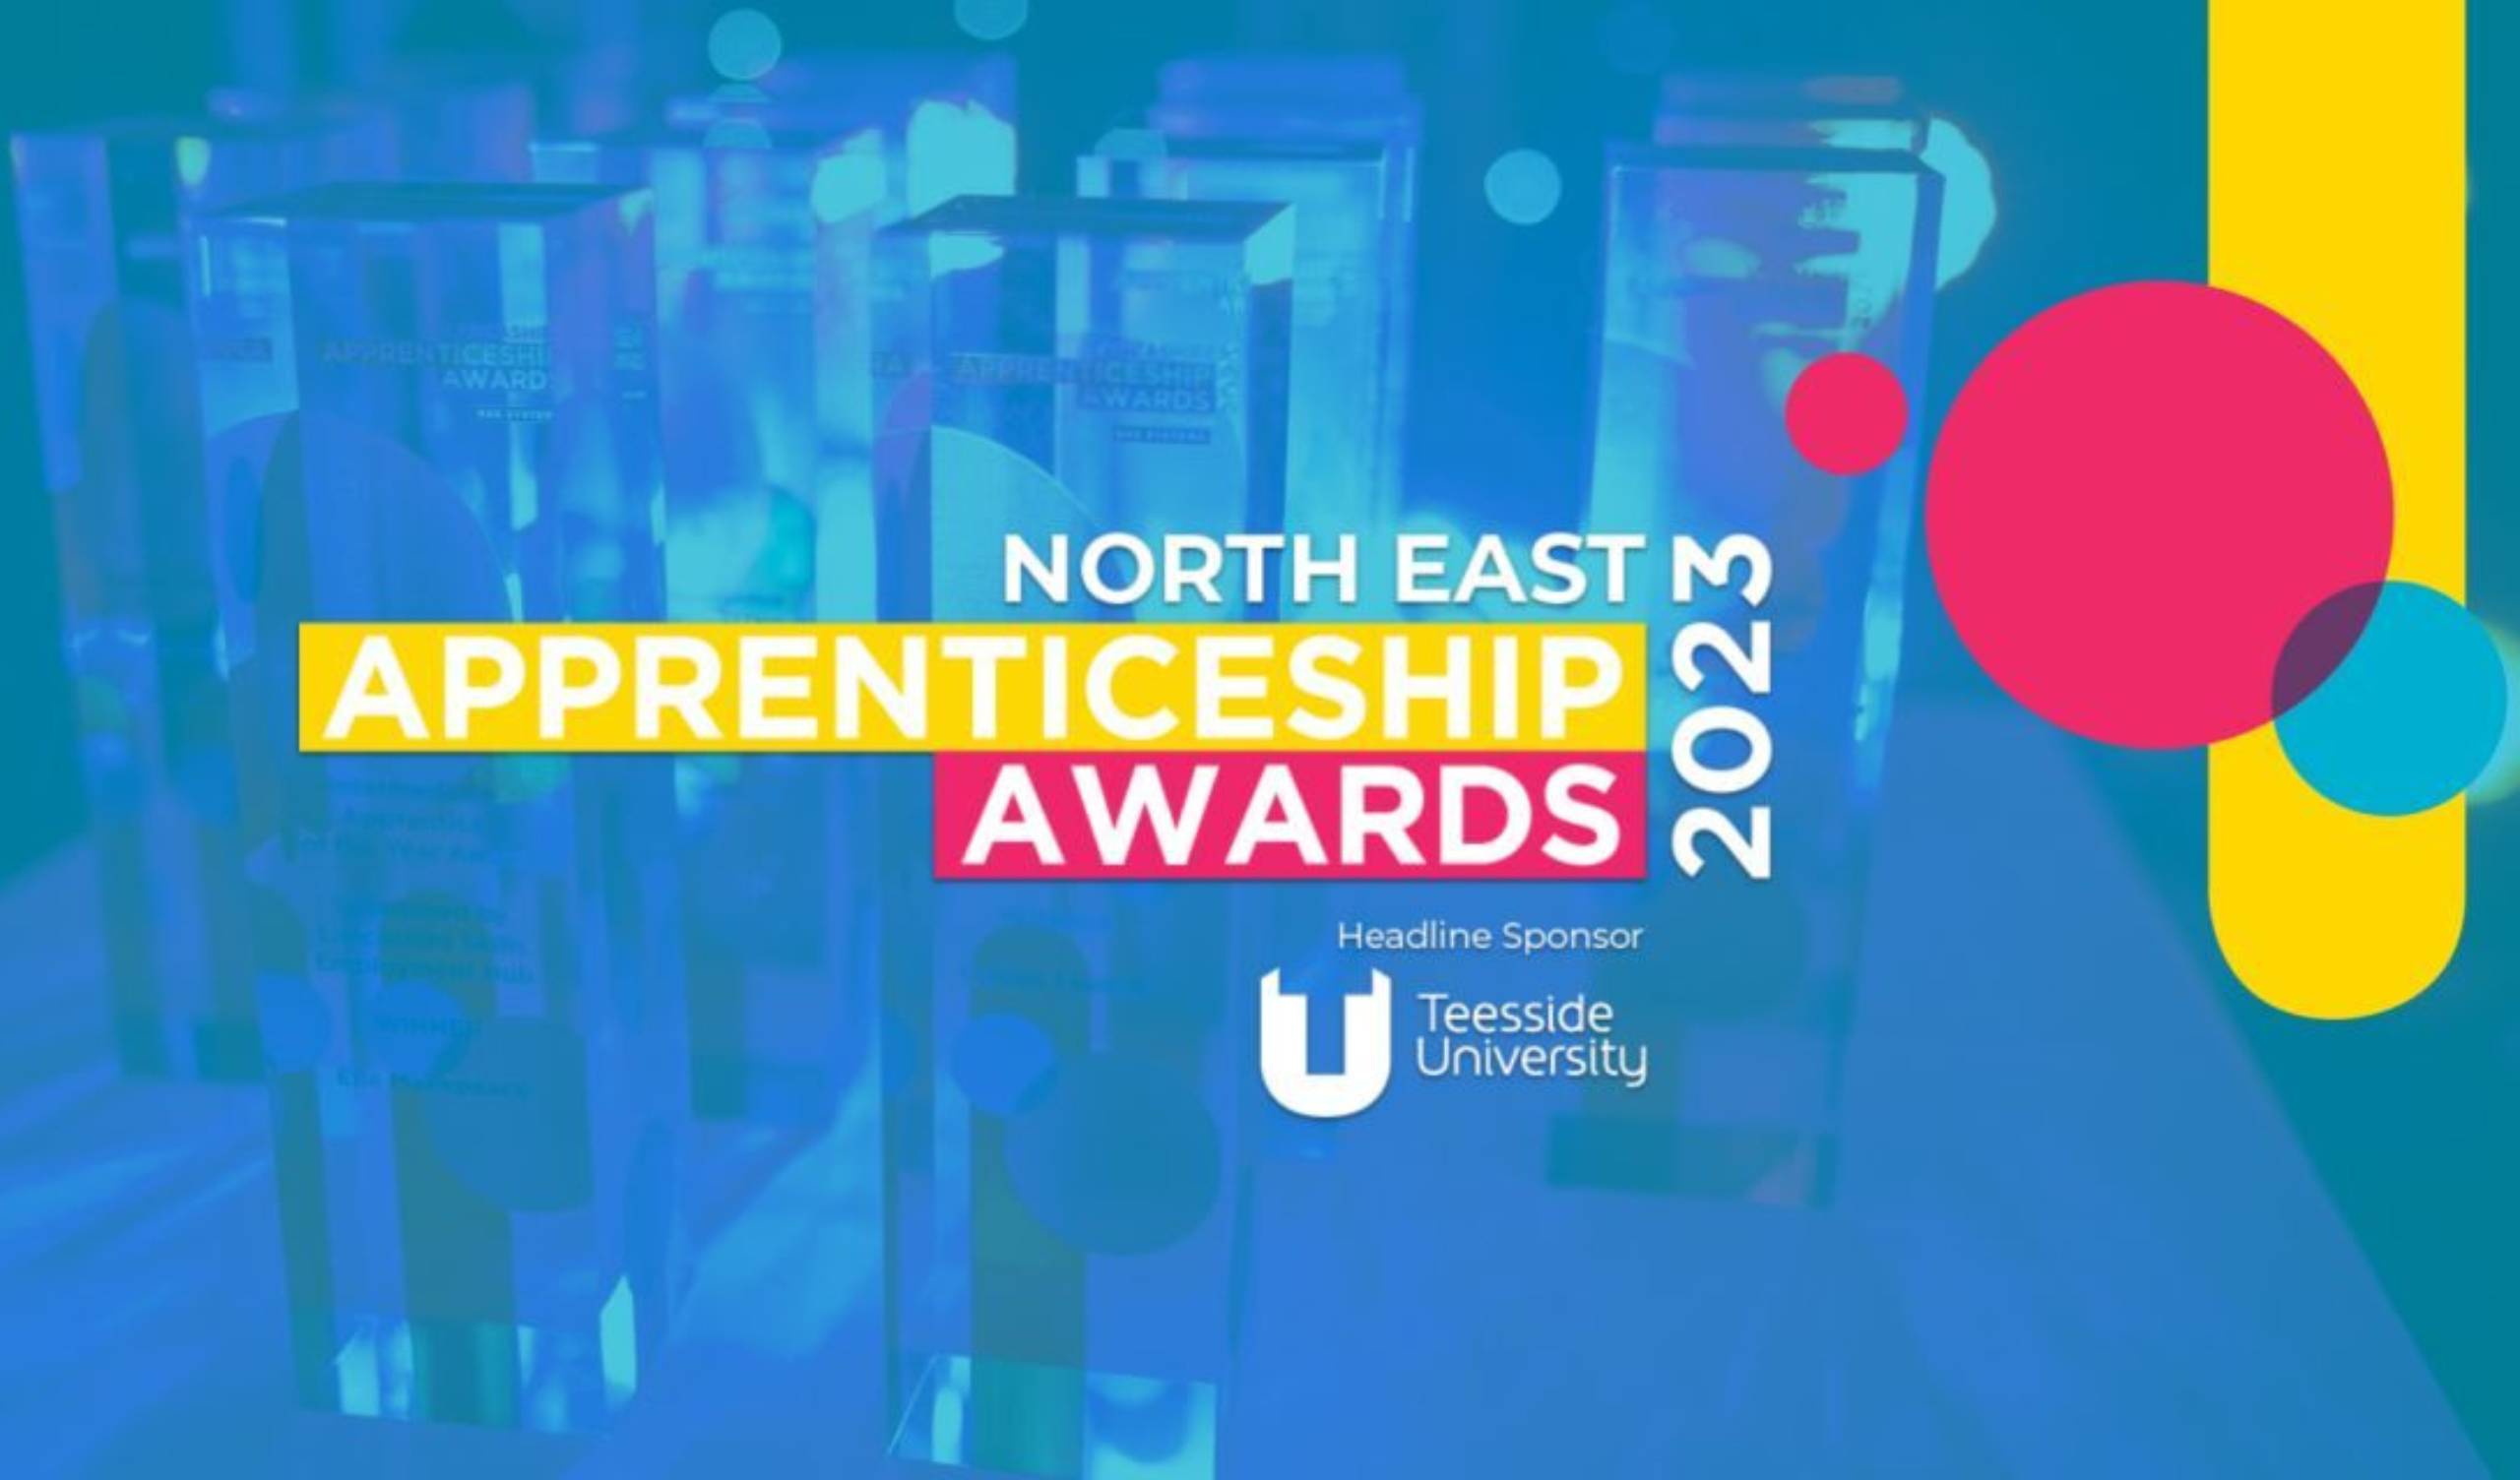 Former engineering apprentice shortlisted for two North East Apprenticeship Awards